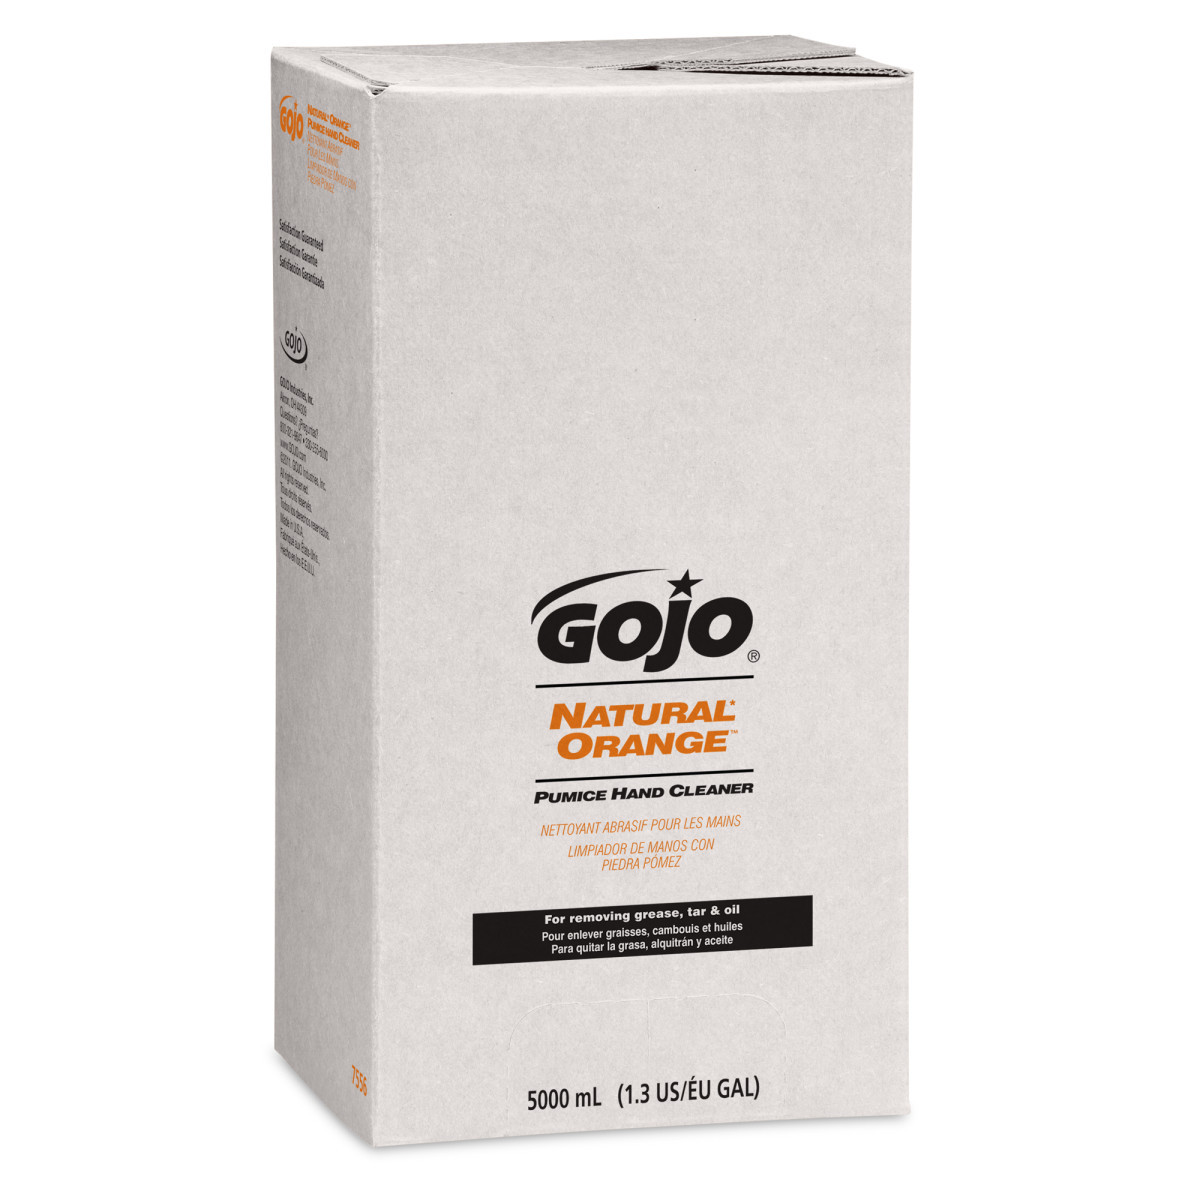 GOJO Fresh Citrus Scented Heavy Duty Hand Cleaner Towels - 72 count